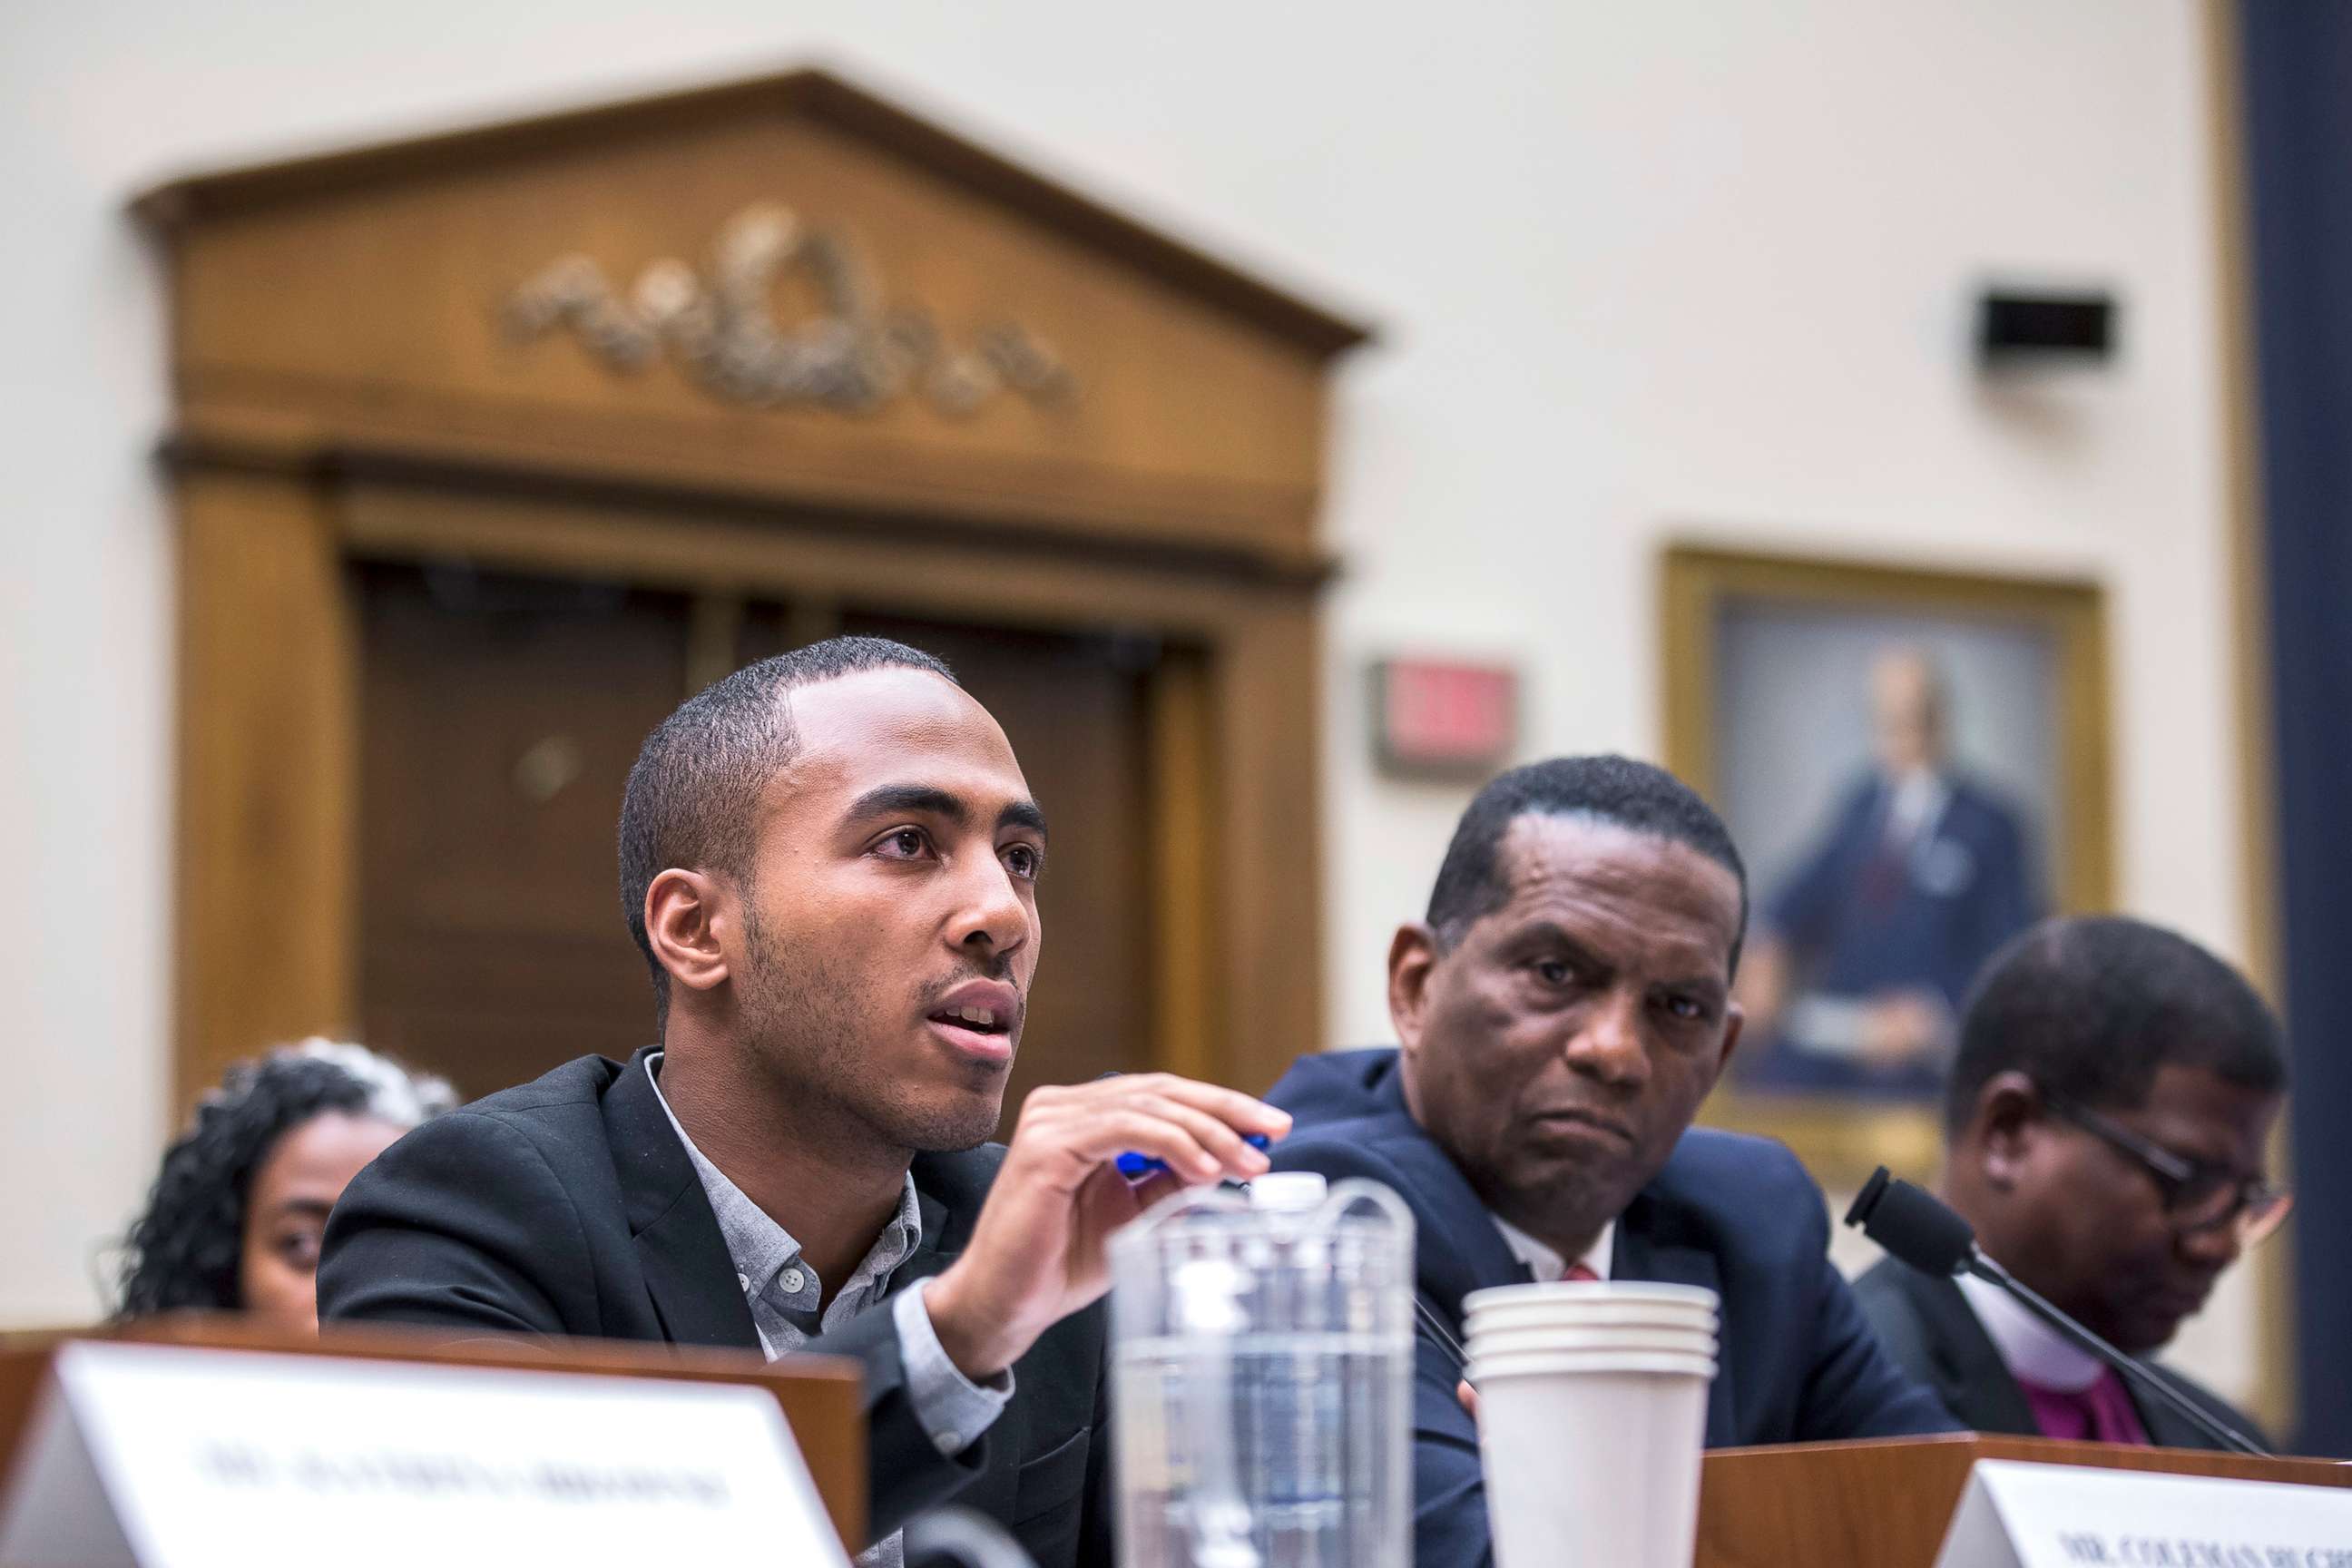 PHOTO: Writer Coleman Hughes testifies during a hearing on slavery reparations held by the House Judiciary Subcommittee on the Constitution, Civil Rights and Civil Liberties, June 19, 2019, in Washington, D.C.